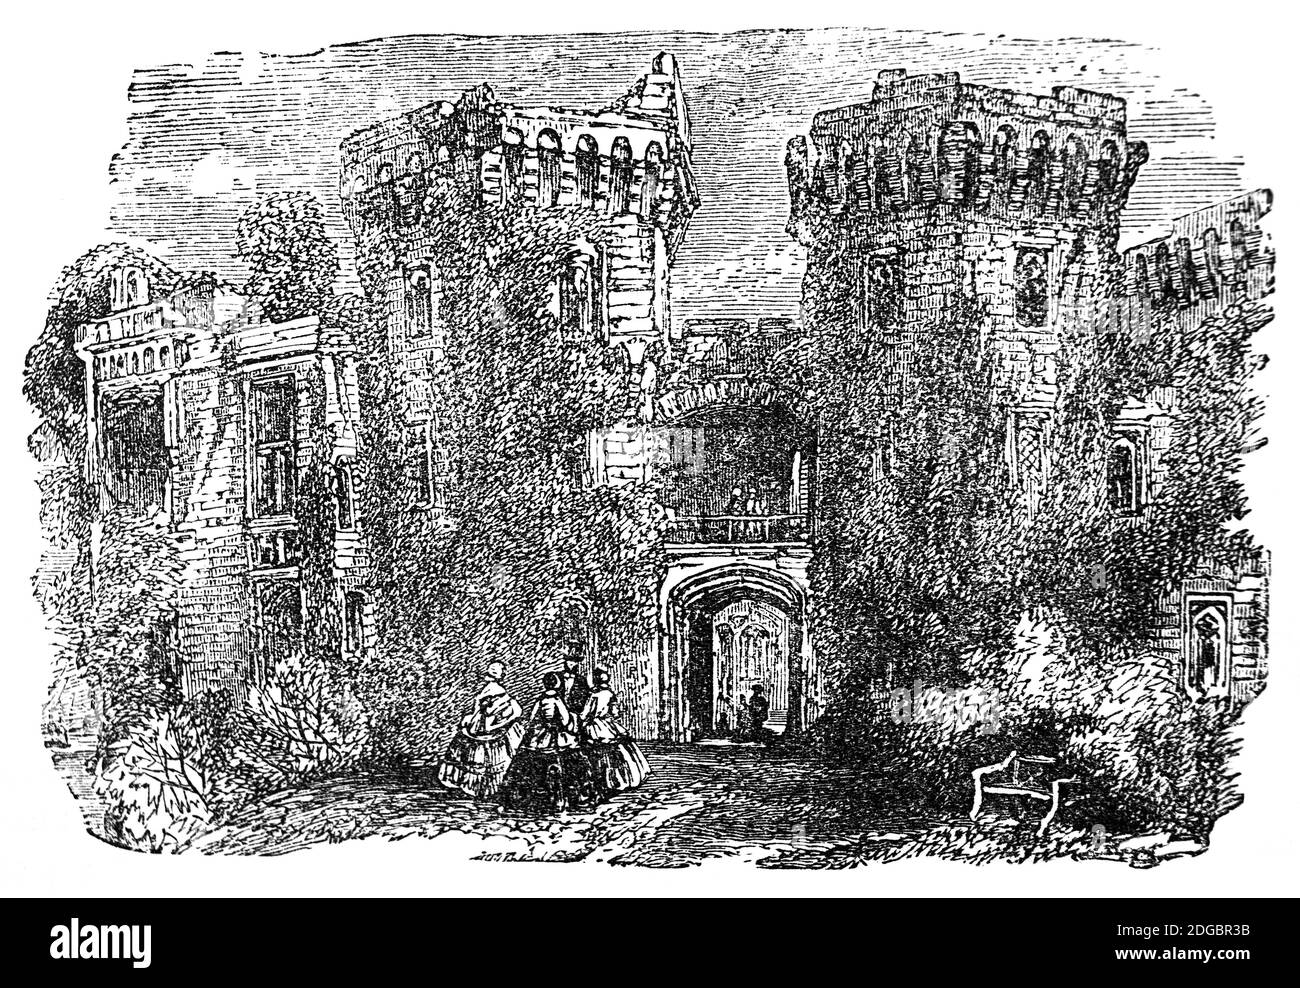 A 19th century view of the main gatehouse to Raglan Castle, a late medieval castle north of the village of Raglan in Monmouthshire, south Wales. The modern castle dates from circa 16th century, when successive ruling families of the Herberts and the Somersets created a luxurious, fortified castle. During the English Civil War the castle was held on behalf of Charles I but taken by Parliamentary forces in 1646. In the aftermath, the castle was dismantled; after the restoration of Charles II, the Somersets declined to restore the castle and it became a romantic ruin. Stock Photo